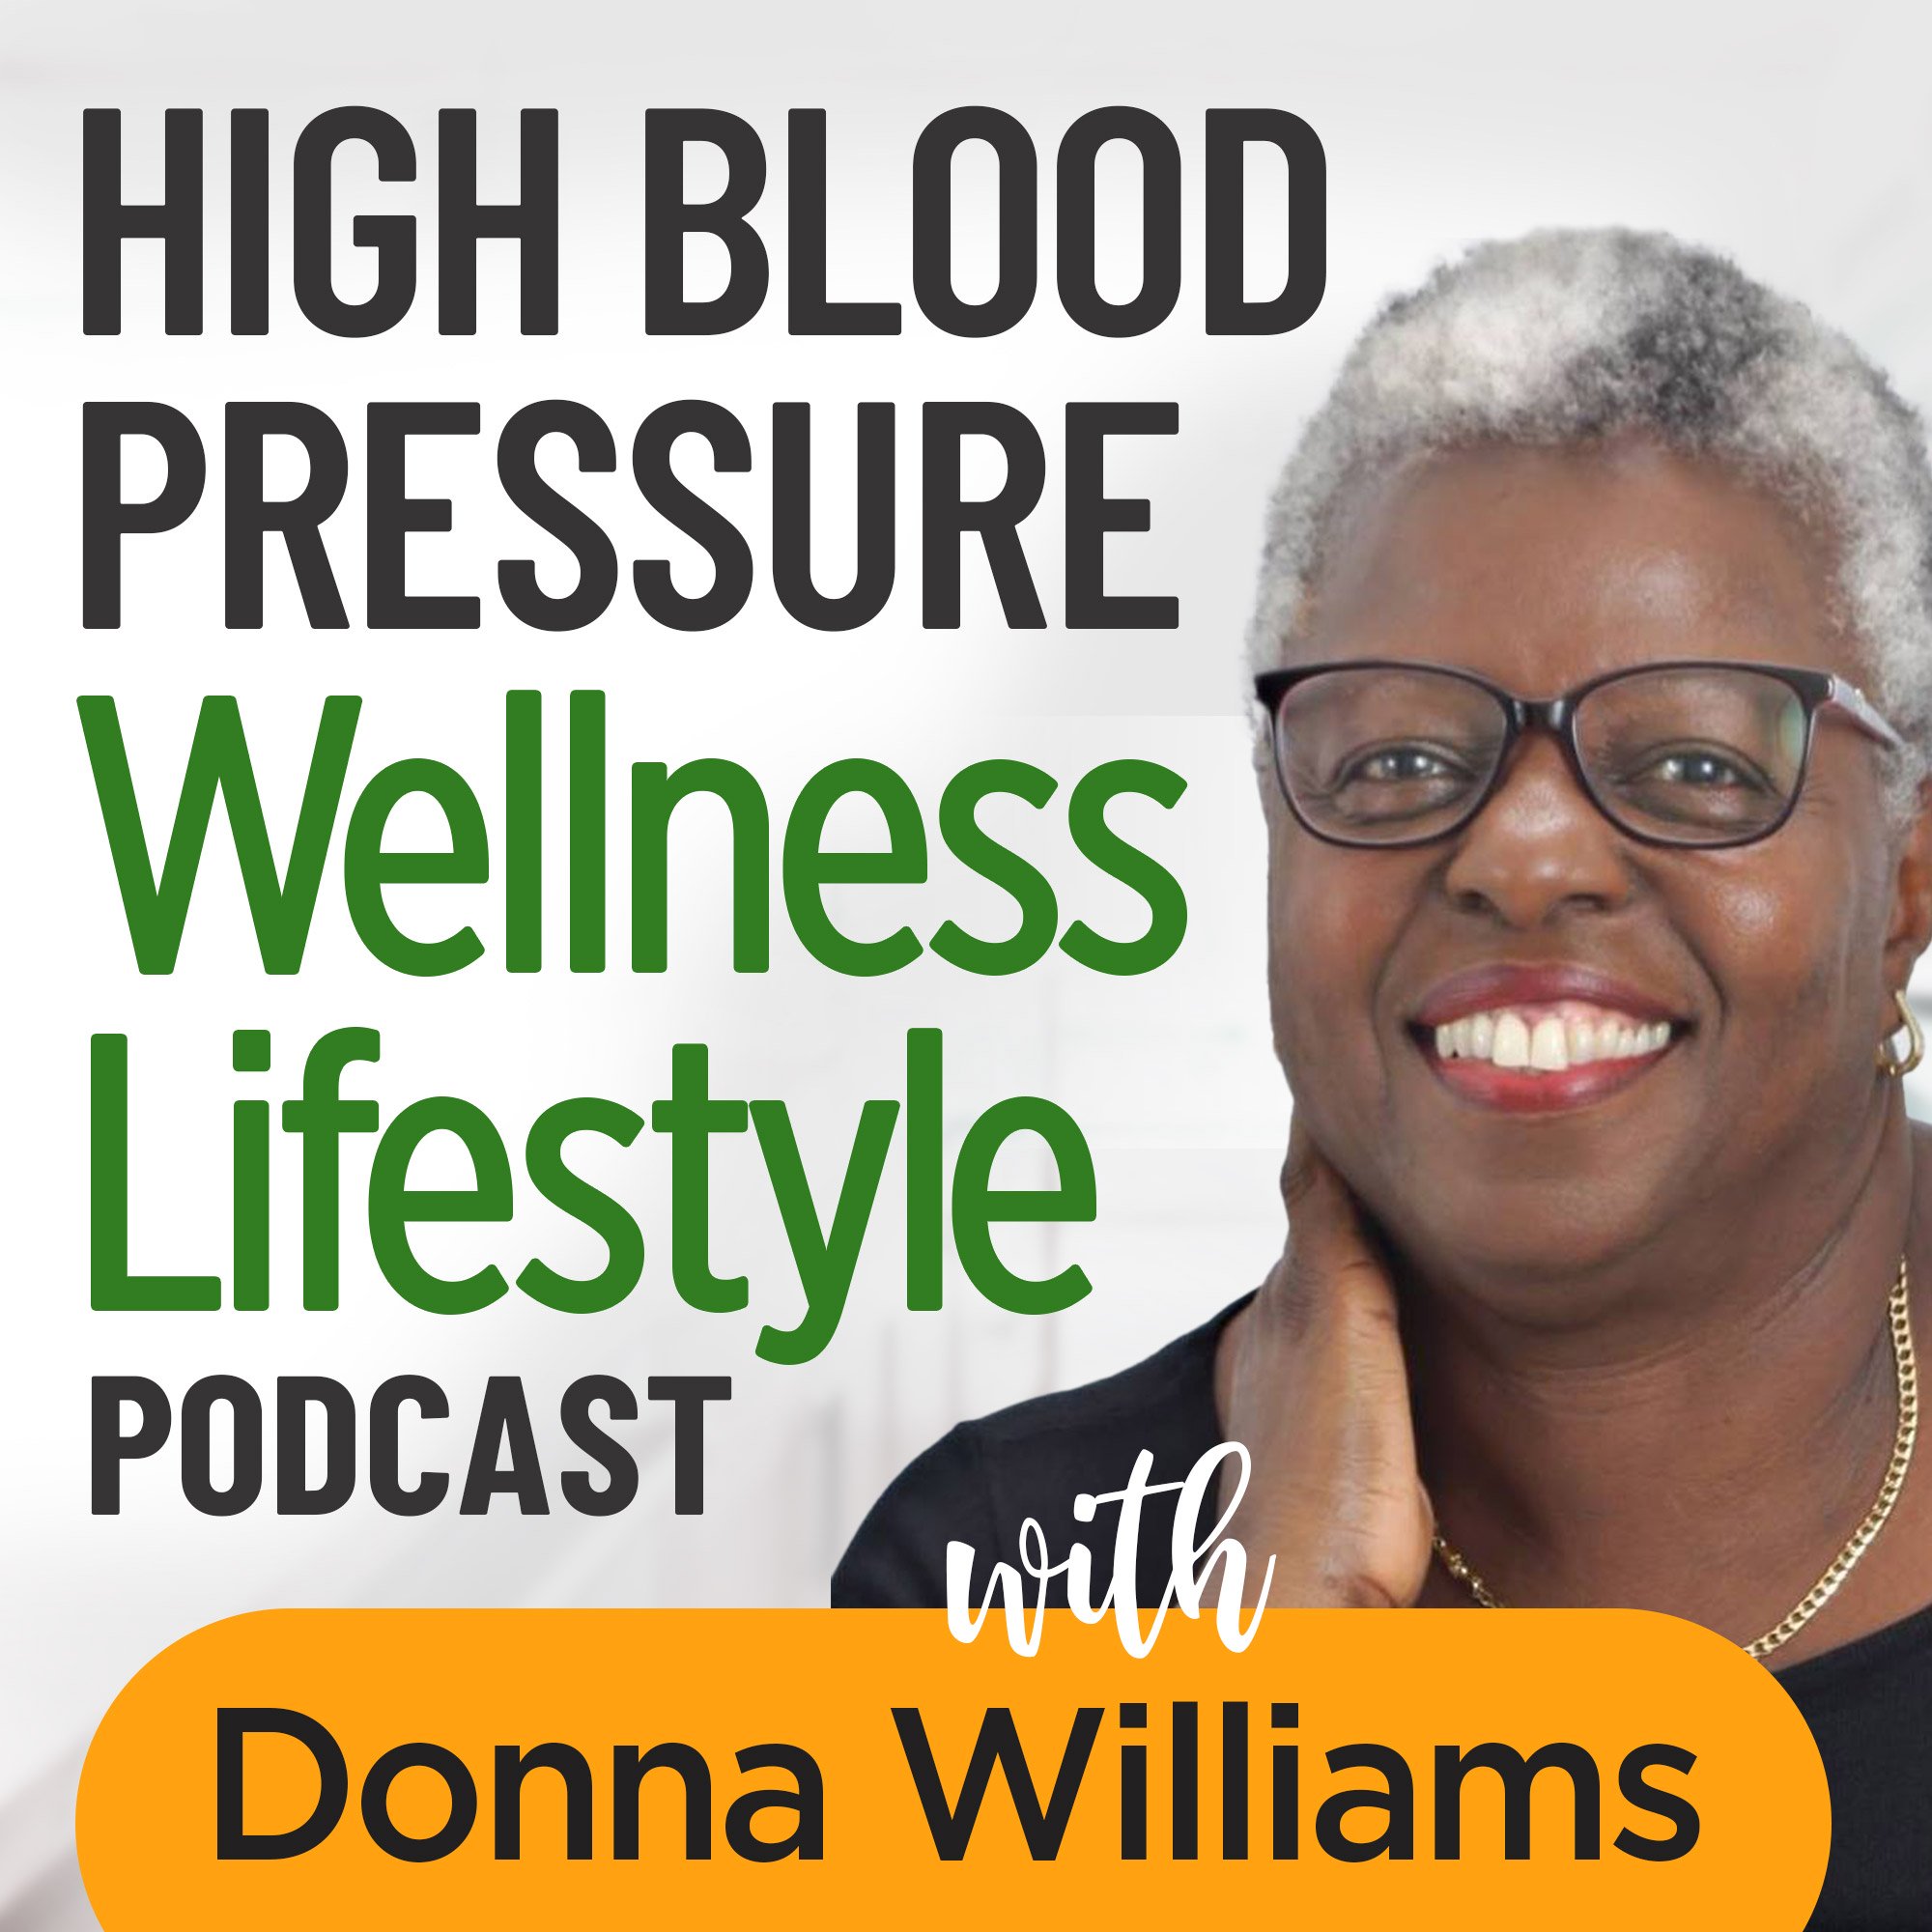 hbp podcast picture.  https://www.info-on-high-blood-pressure.com/8-self-care-habits-that-make-a-difference.html